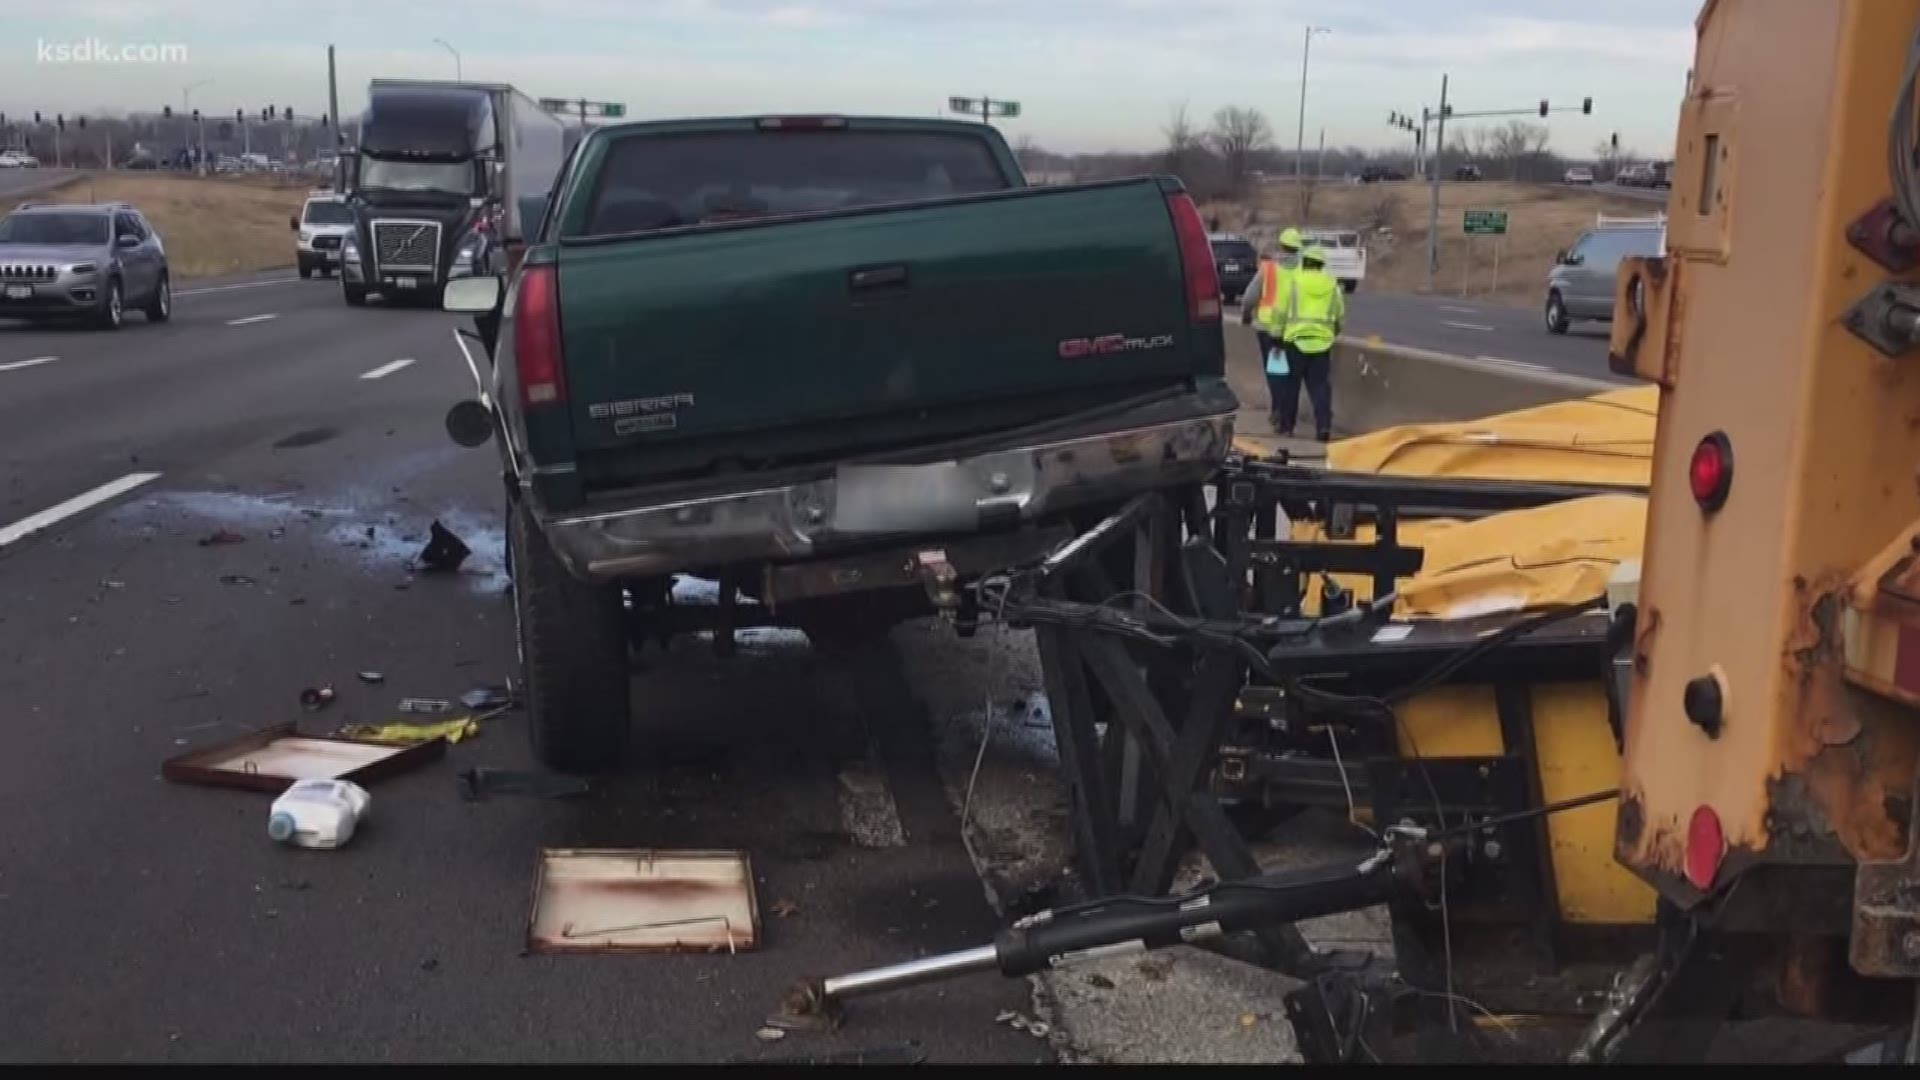 There have been three crashes involving MoDOT equipment since Jan. 1.